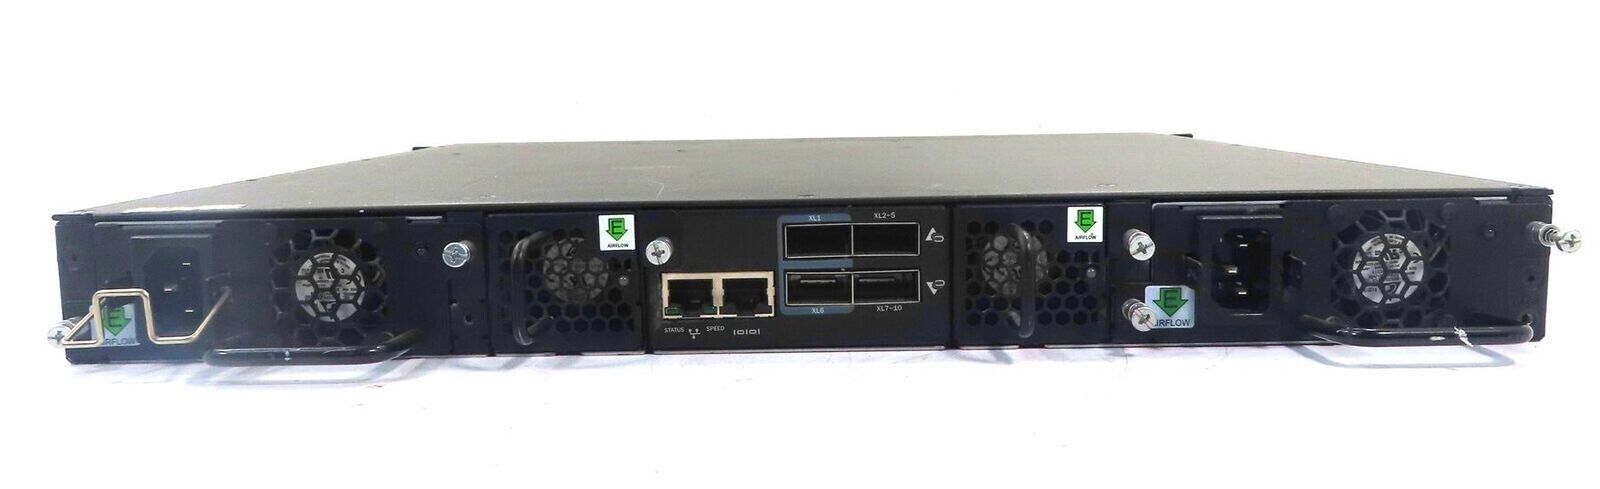 Brocade ICX6610-48P-E 48-port PoE+ Gigabit Ethernet Switch 8x SFP+ 10GbE with PSU (Used) - image 2 of 3